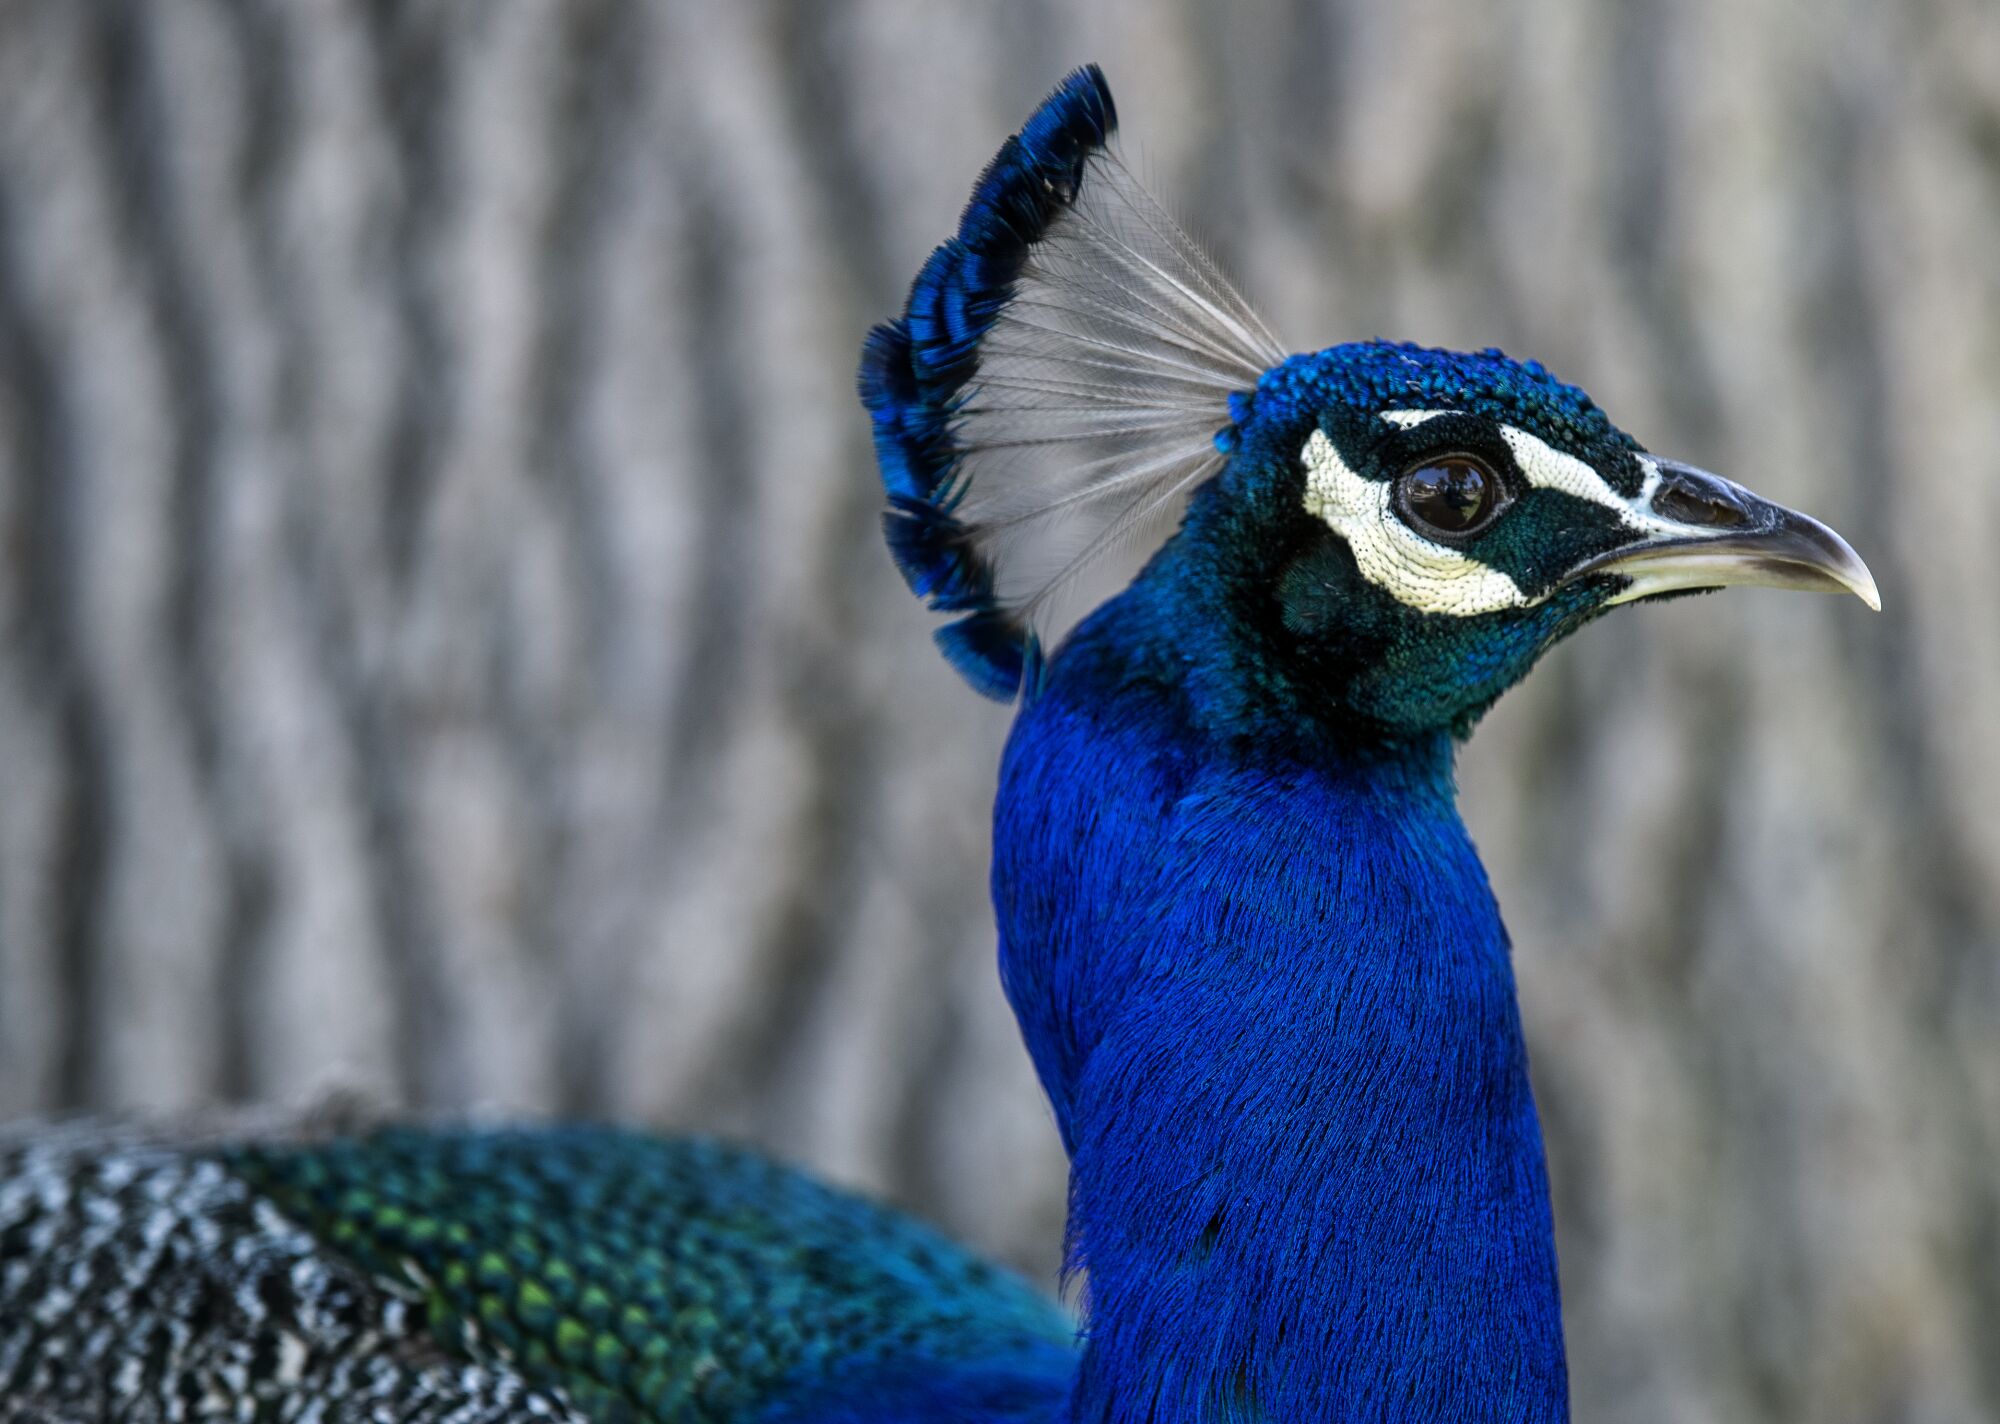 A brilliantly blue peacock with a large crest, the smaller blue top feathers on his head, gazing into the camera